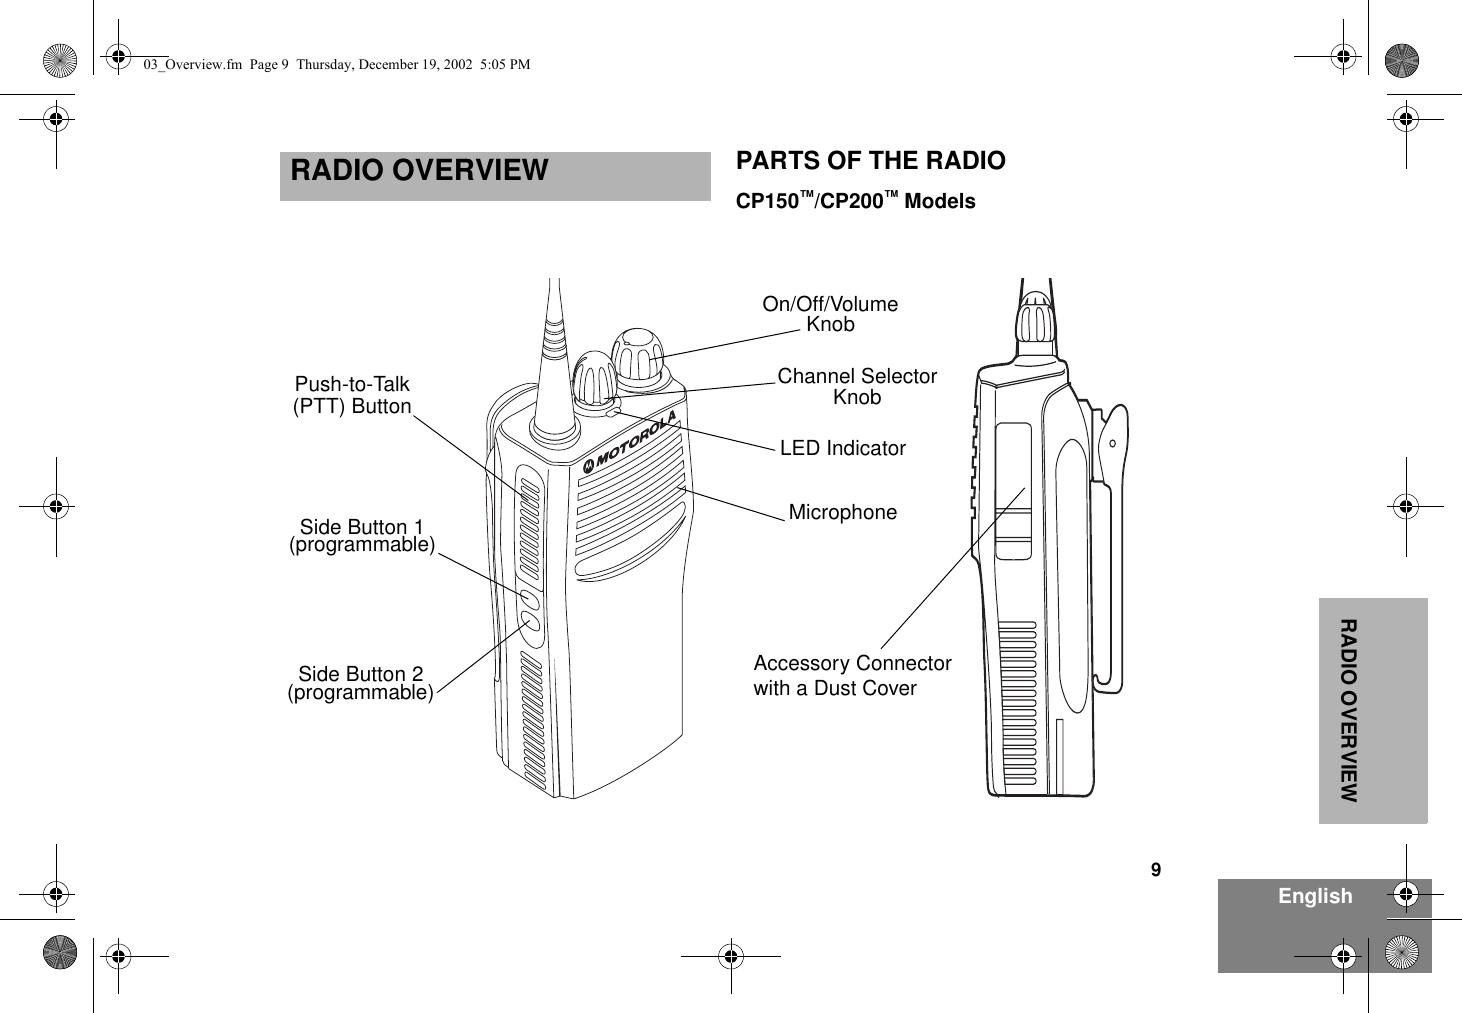 9EnglishRADIO OVERVIEWRADIO OVERVIEW PARTS OF THE RADIOCP150™/CP200™ Models(programmable)Side Button 1Push-to-Talk(PTT) Button(programmable)Side Button 2 Accessory Connectorwith a Dust CoverLED IndicatorOn/Off/VolumeKnobChannel SelectorKnobMicrophone03_Overview.fm  Page 9  Thursday, December 19, 2002  5:05 PM